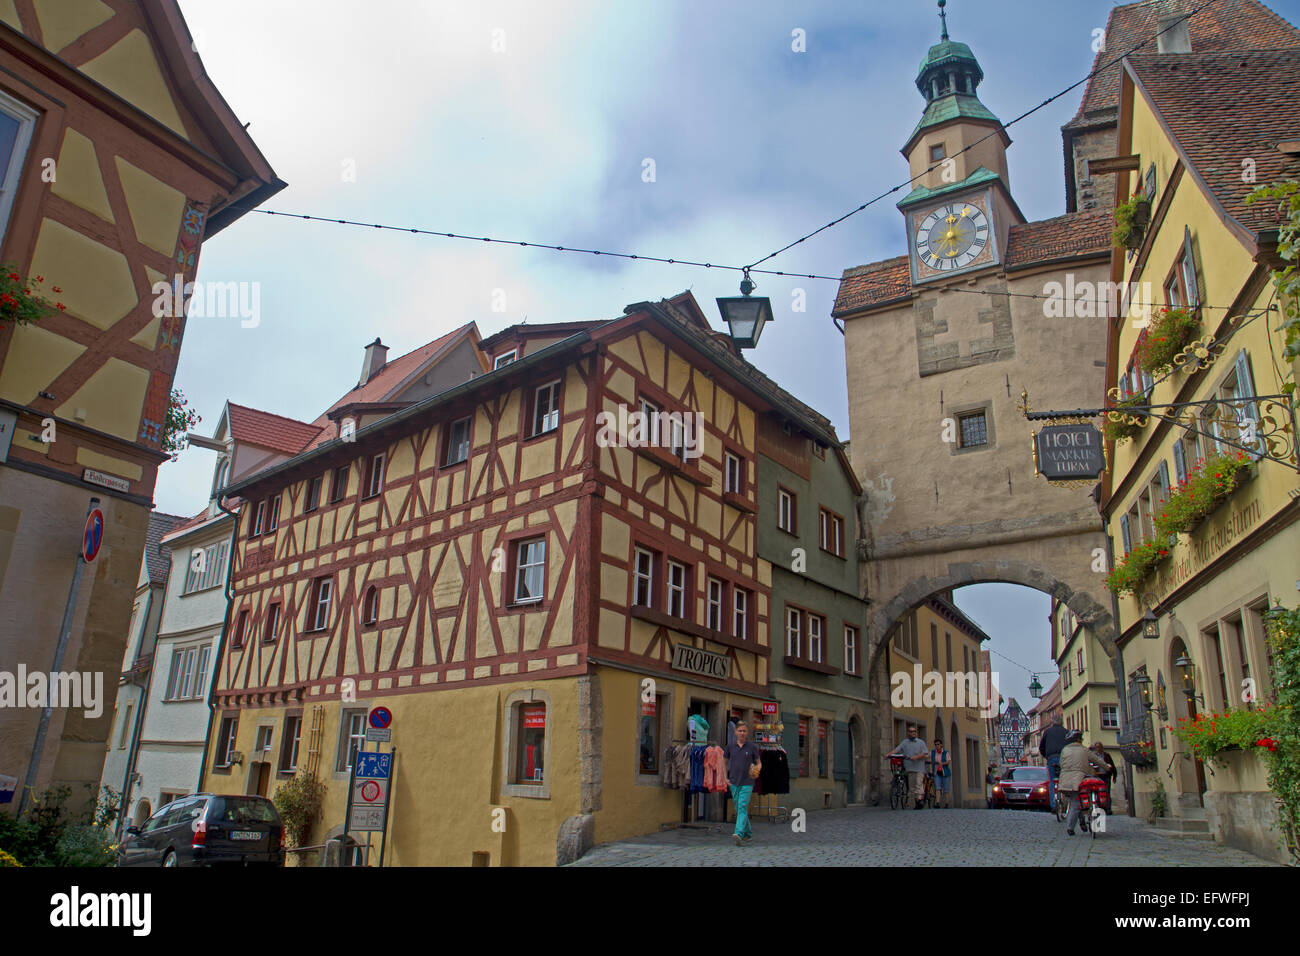 The medieval town of Rothenburg ob der Tauber Stock Photo